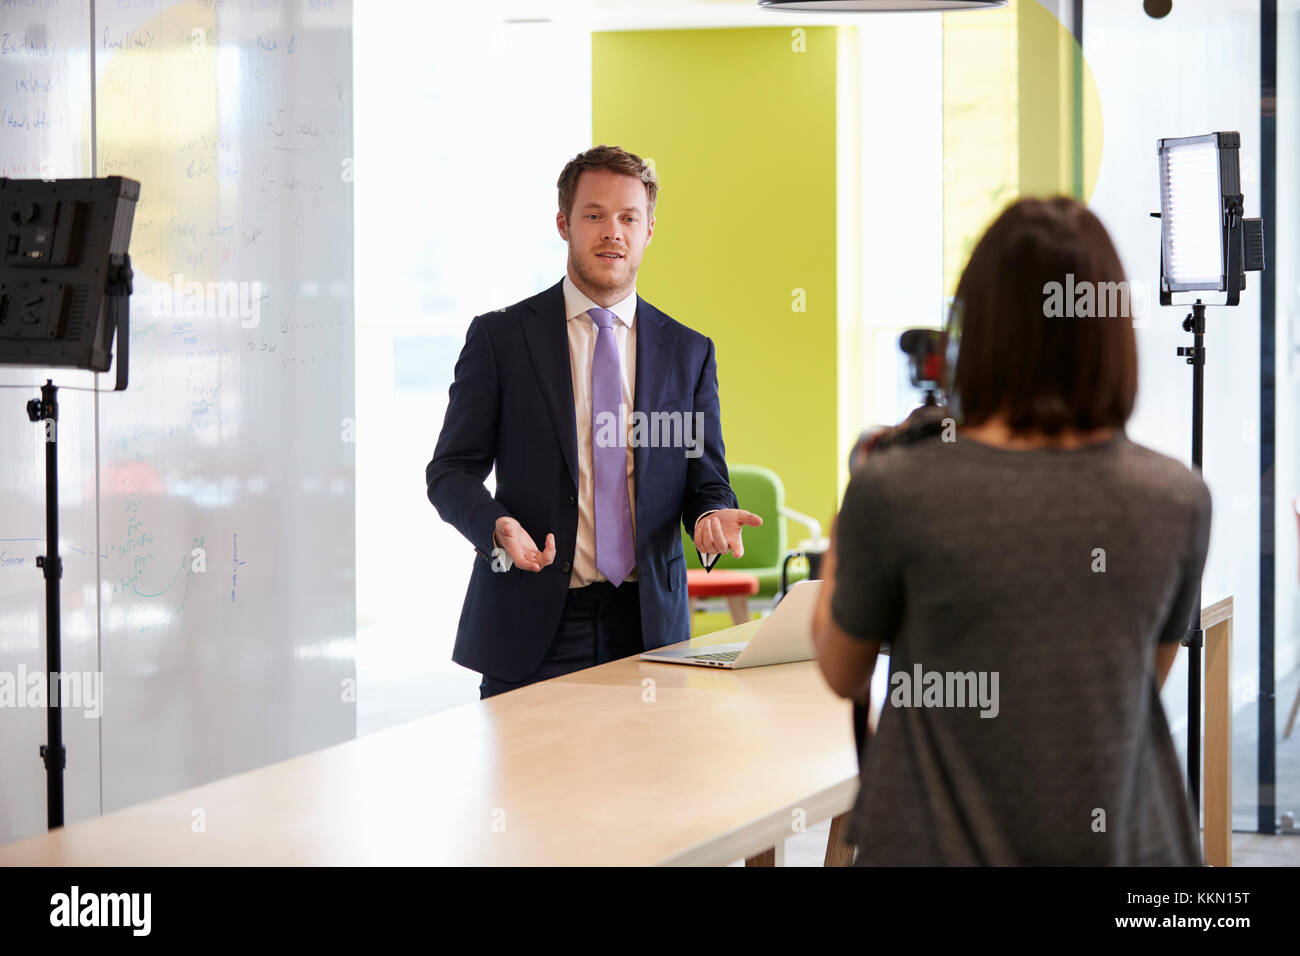 Woman filming a man for a corporate demonstration video Stock Photo